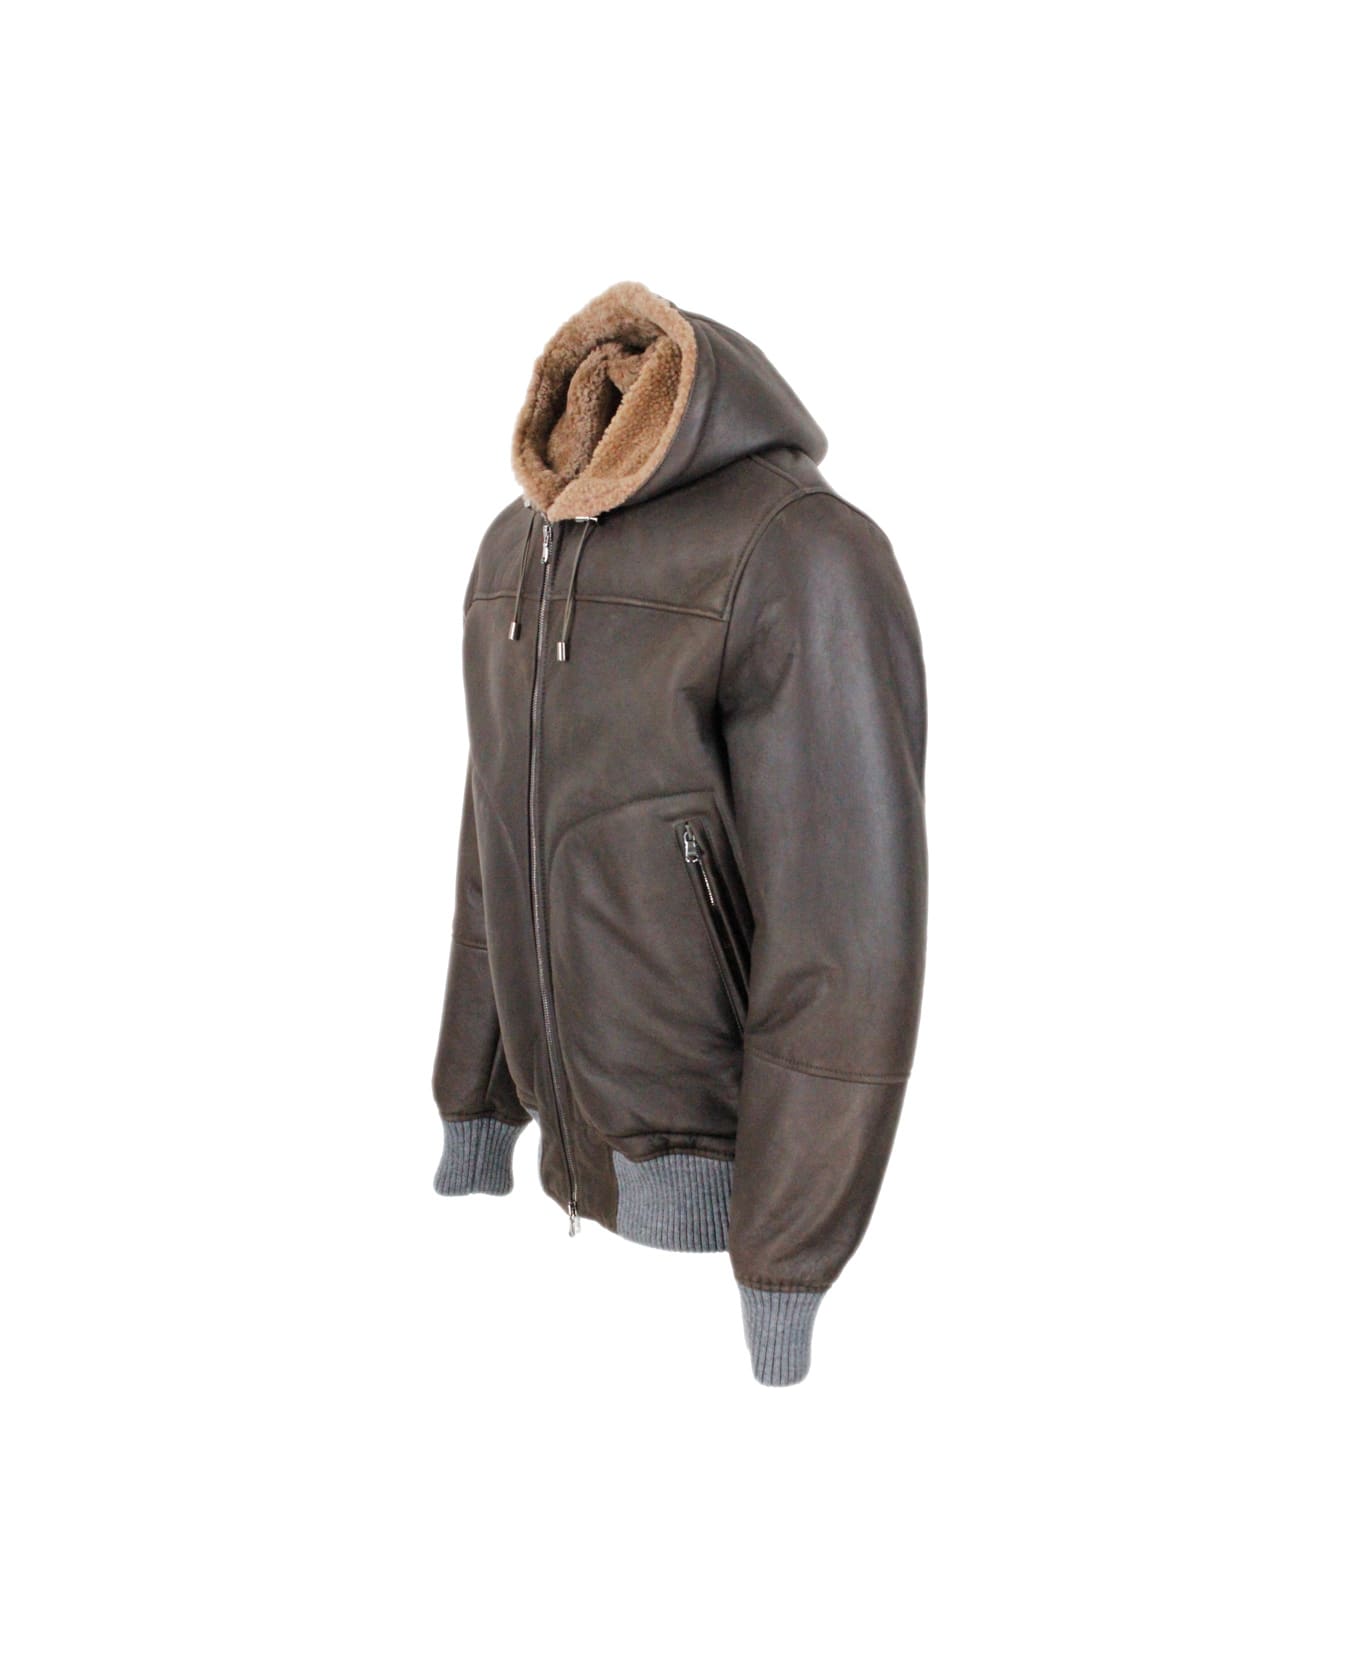 Barba Napoli Shearling Bomber Jacket With Hood With Drawstring And Trims In Stretch Knit And Zip Closure - Brown